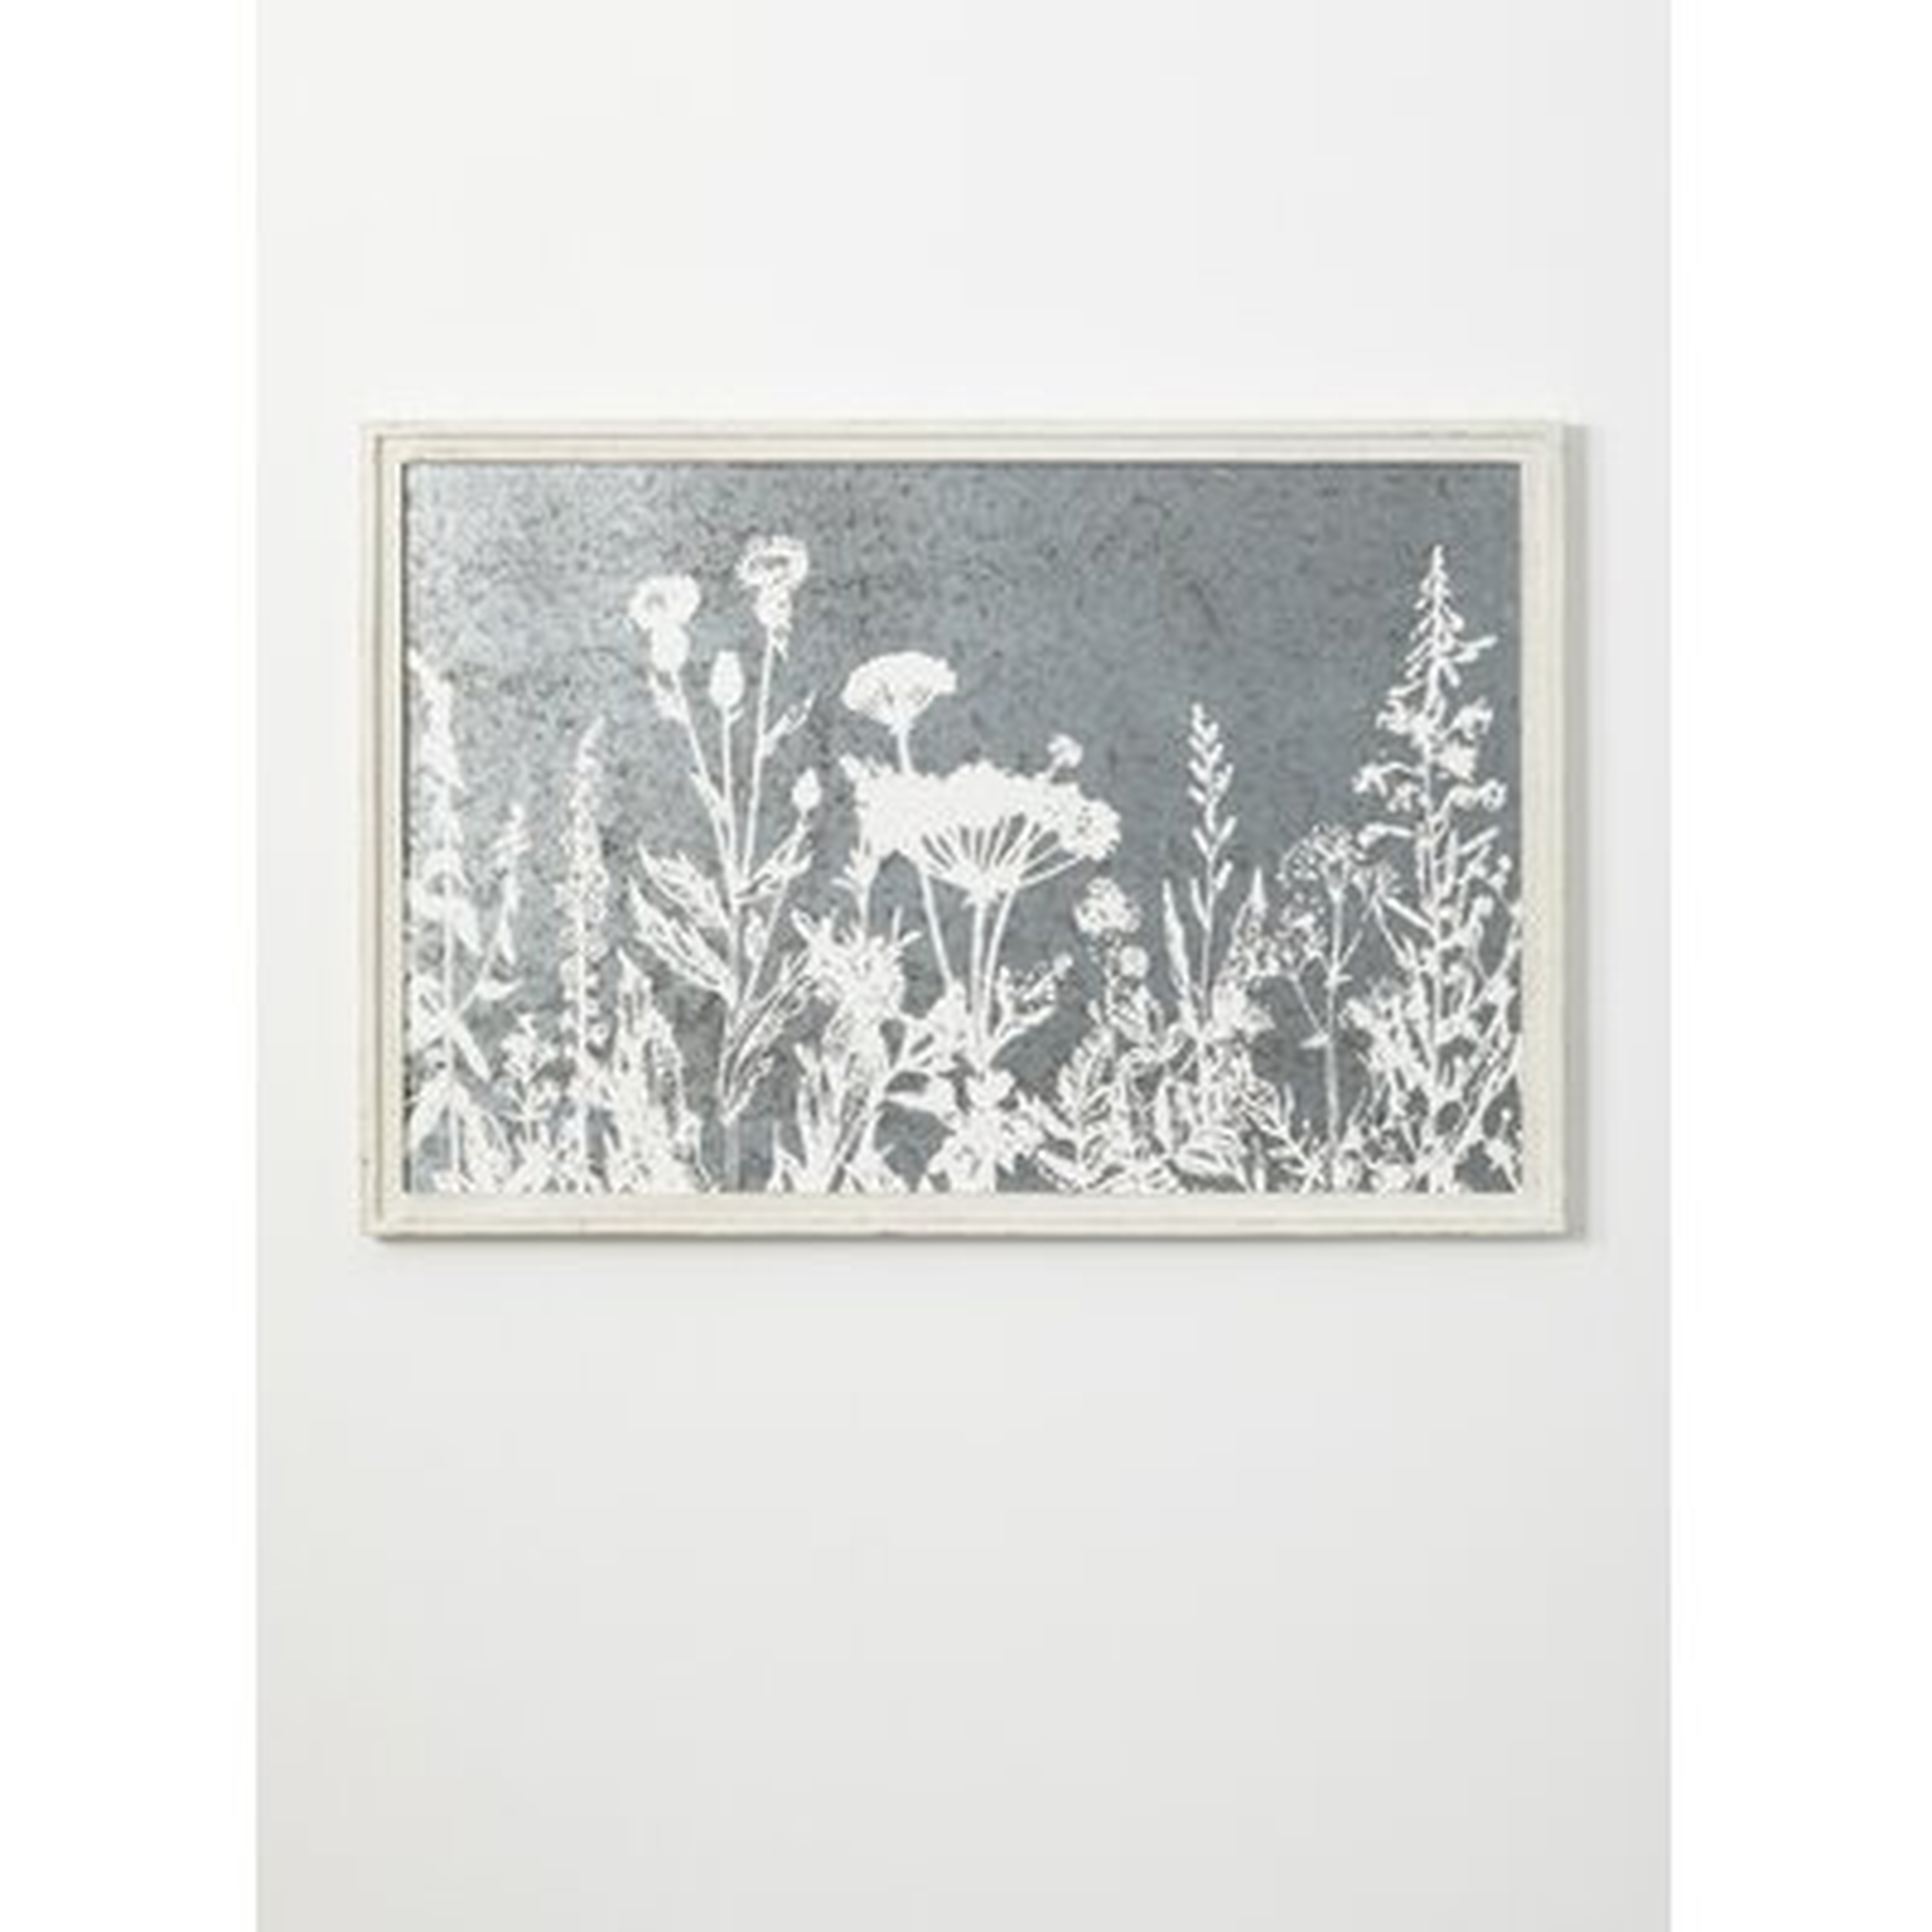 Herb & Flower - Picture Frame Painting Print on Paper - Wayfair